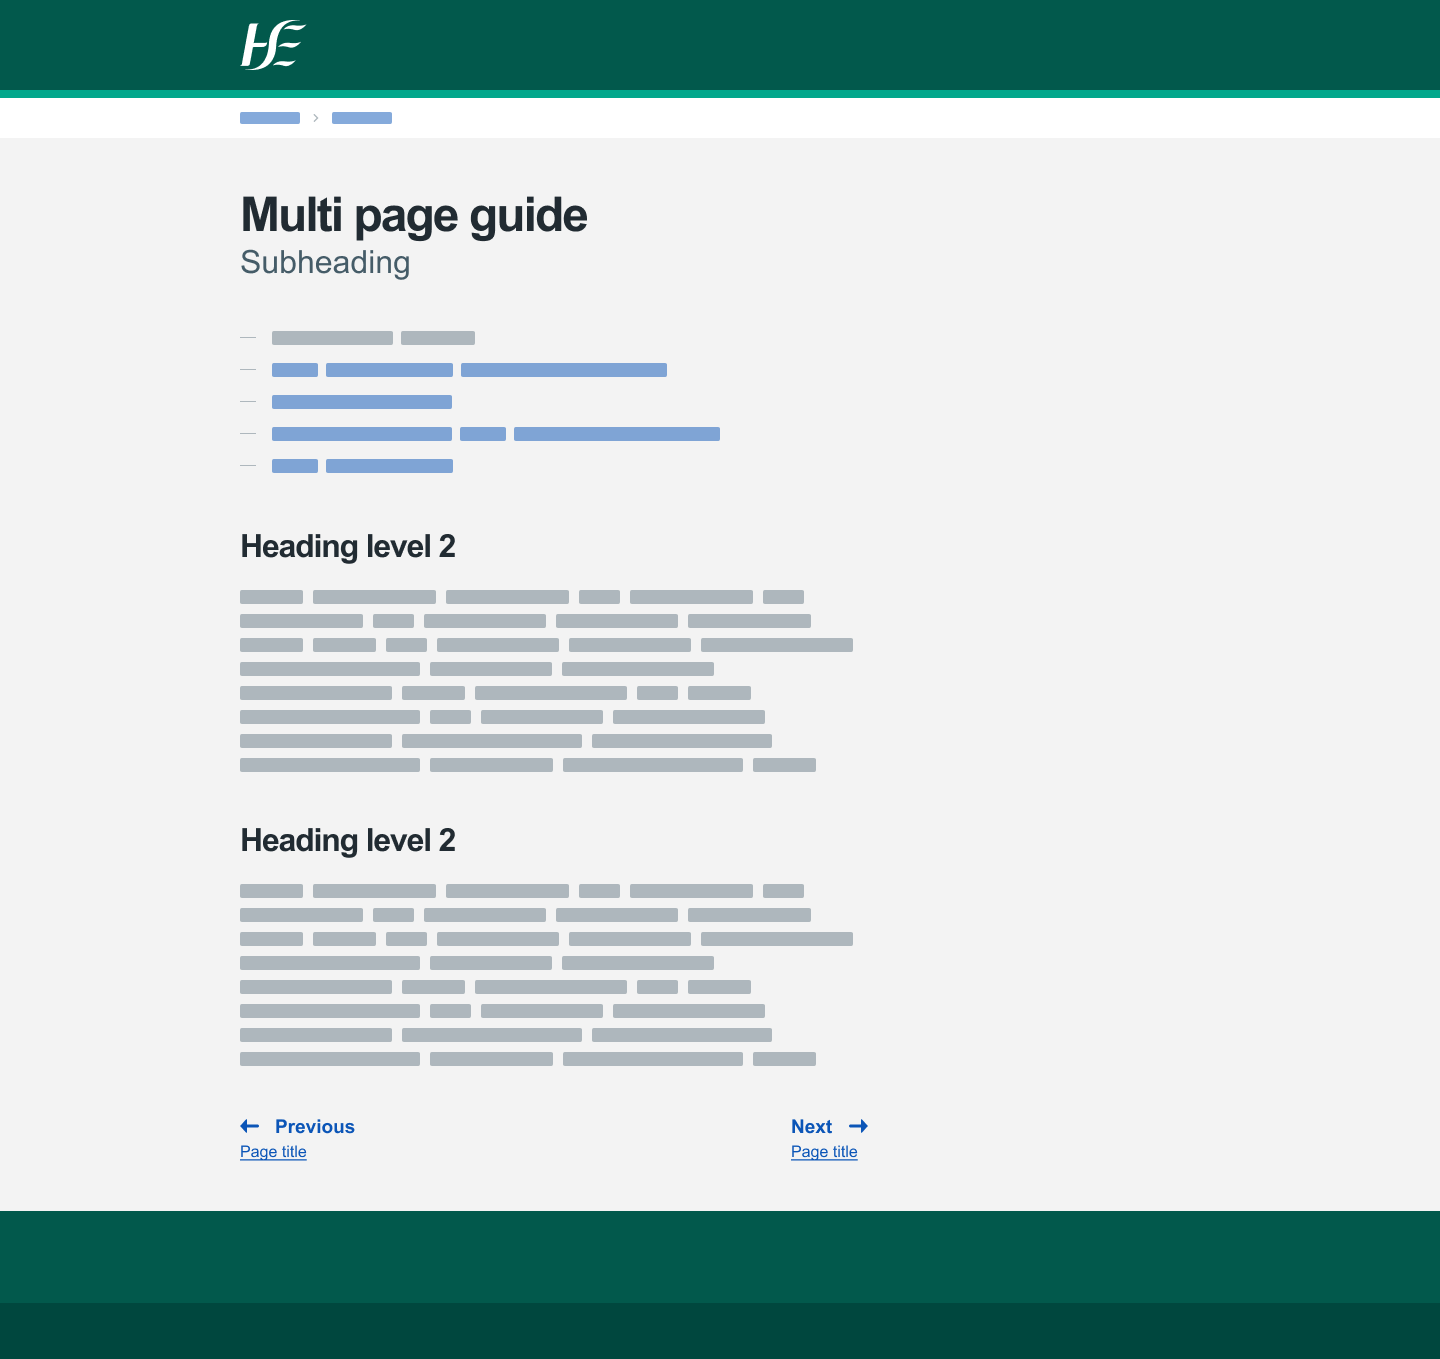 Example of a multi-page guide